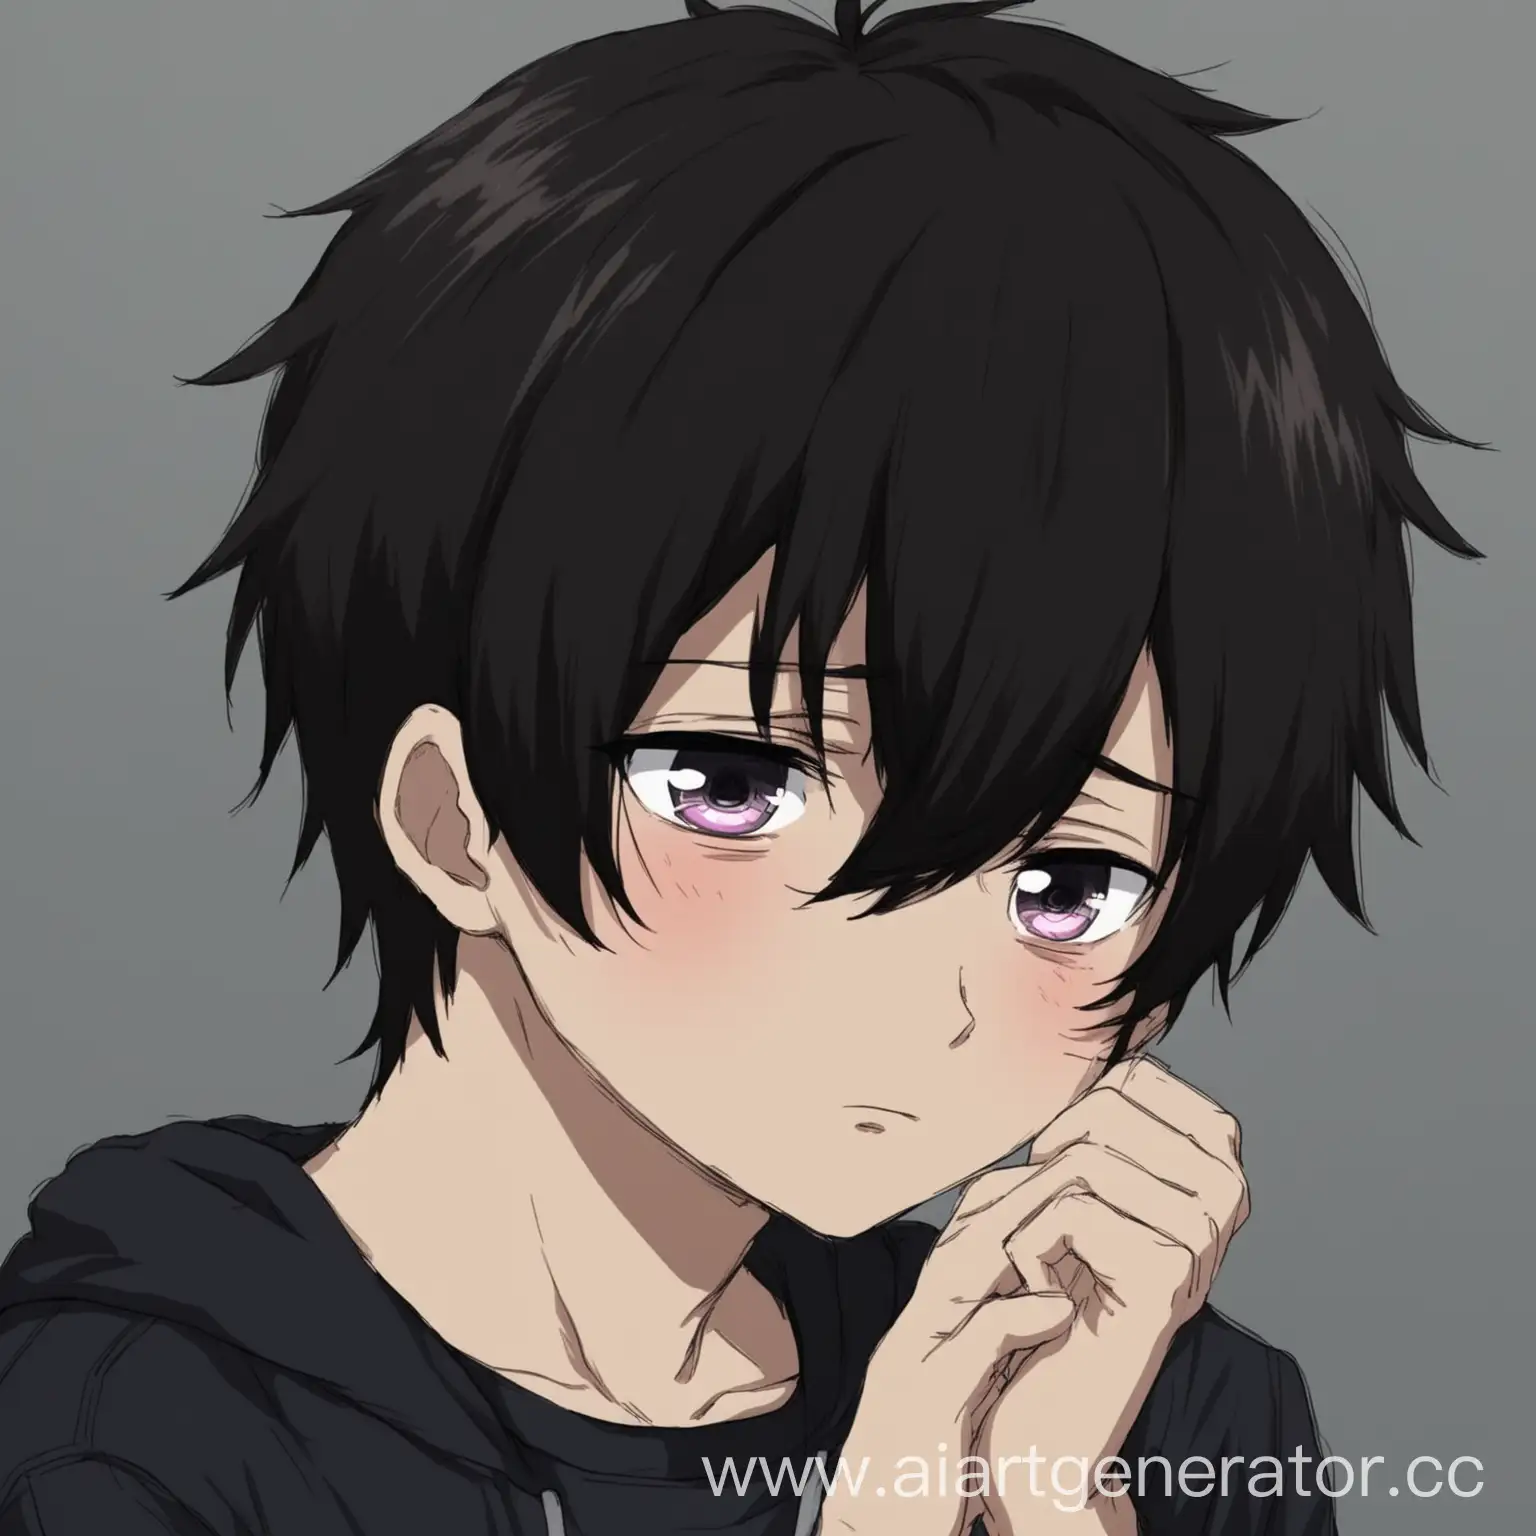 Shy-Anime-Teenager-Boy-with-Dark-Hair-and-Femboy-Appearance